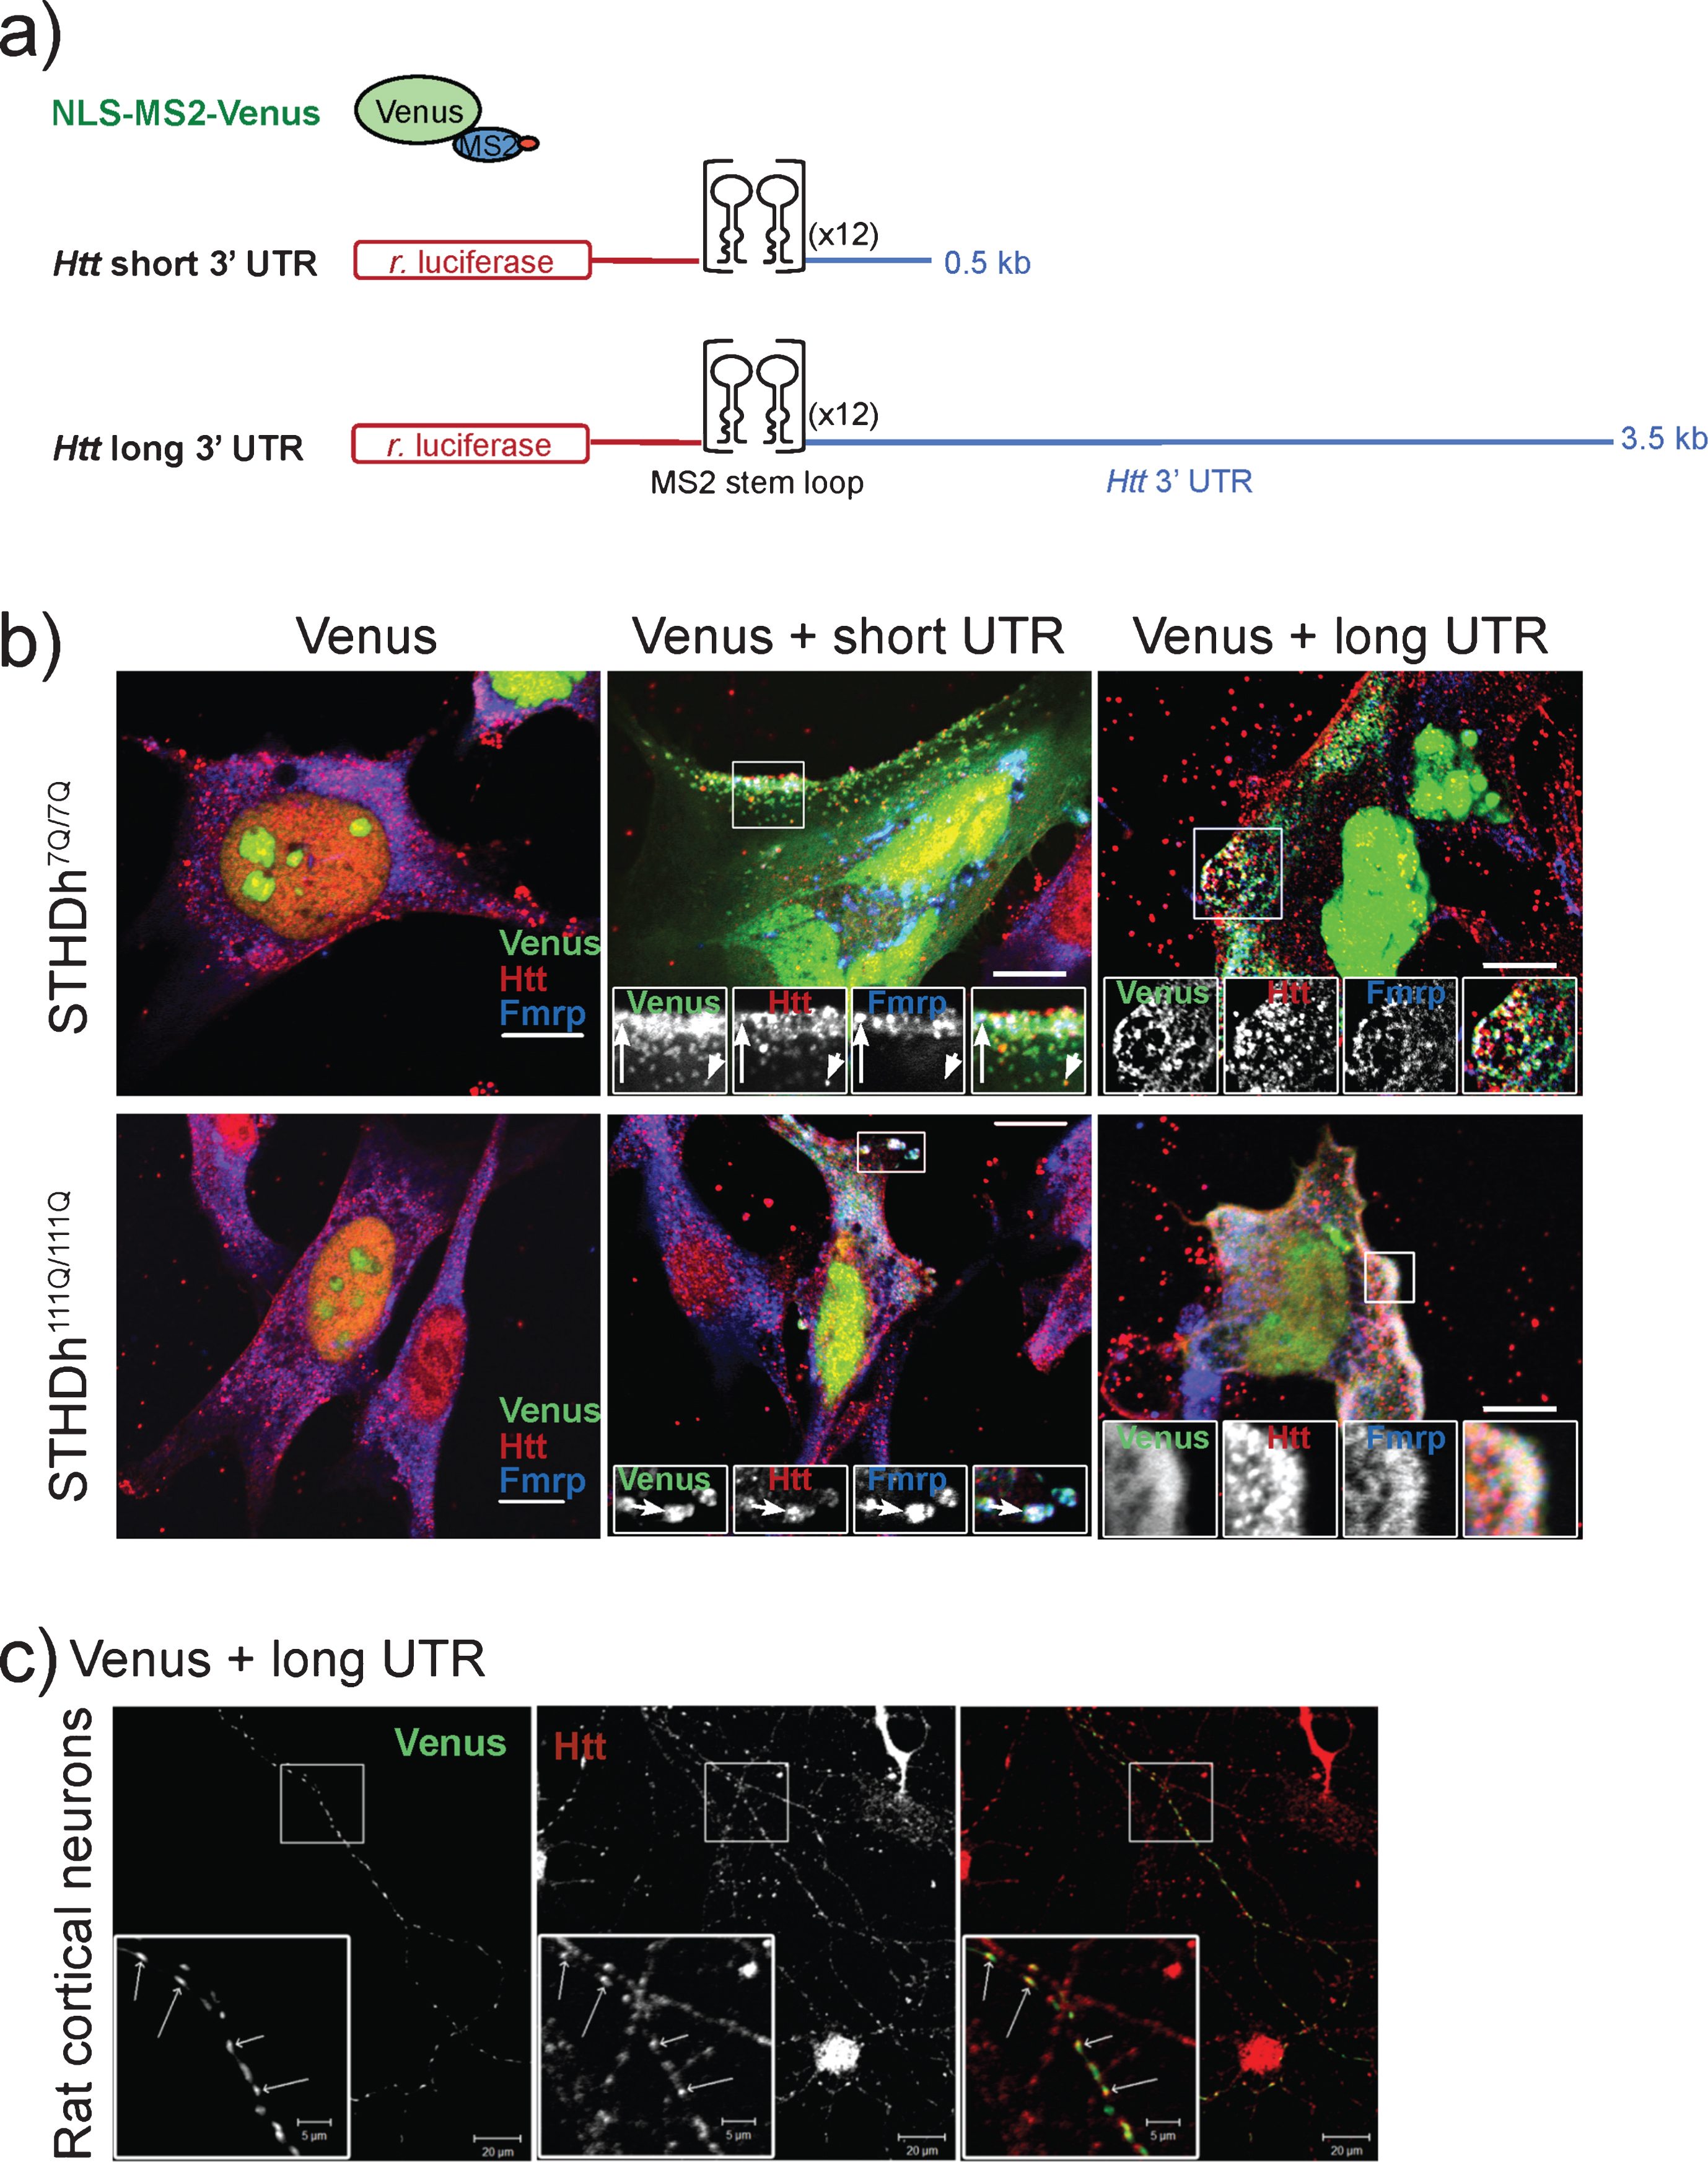 MS2-tagged Htt 3’ UTR co-localizes 
with Htt in wild type and mutant Htt striatal precursor cell lines. a) Schematic shows the elements of the 
bipartite MS2 reporter system containing short or long Htt 3’ UTR sequence. Control experiments express 
NLS-MS2-Venus alone. b) Htt and Fmrp co-localize with Htt short and long reporters in wild-type 
(STHdh7Q/7Q) and mutant (STHdh111Q/111Q) striatal precursor cells. Merged 
images and individual channels for enlarged regions (boxes) are shown for each experimental combination. The 
arrows highlight instances of all three co-localization events, while the arrowhead shows Htt and Htt 3’ 
UTR co-localization. Scale bars are 10μm. c) Endogenous Htt co-localizes with long Htt 3’ UTR in 
primary rat cortical neurons.